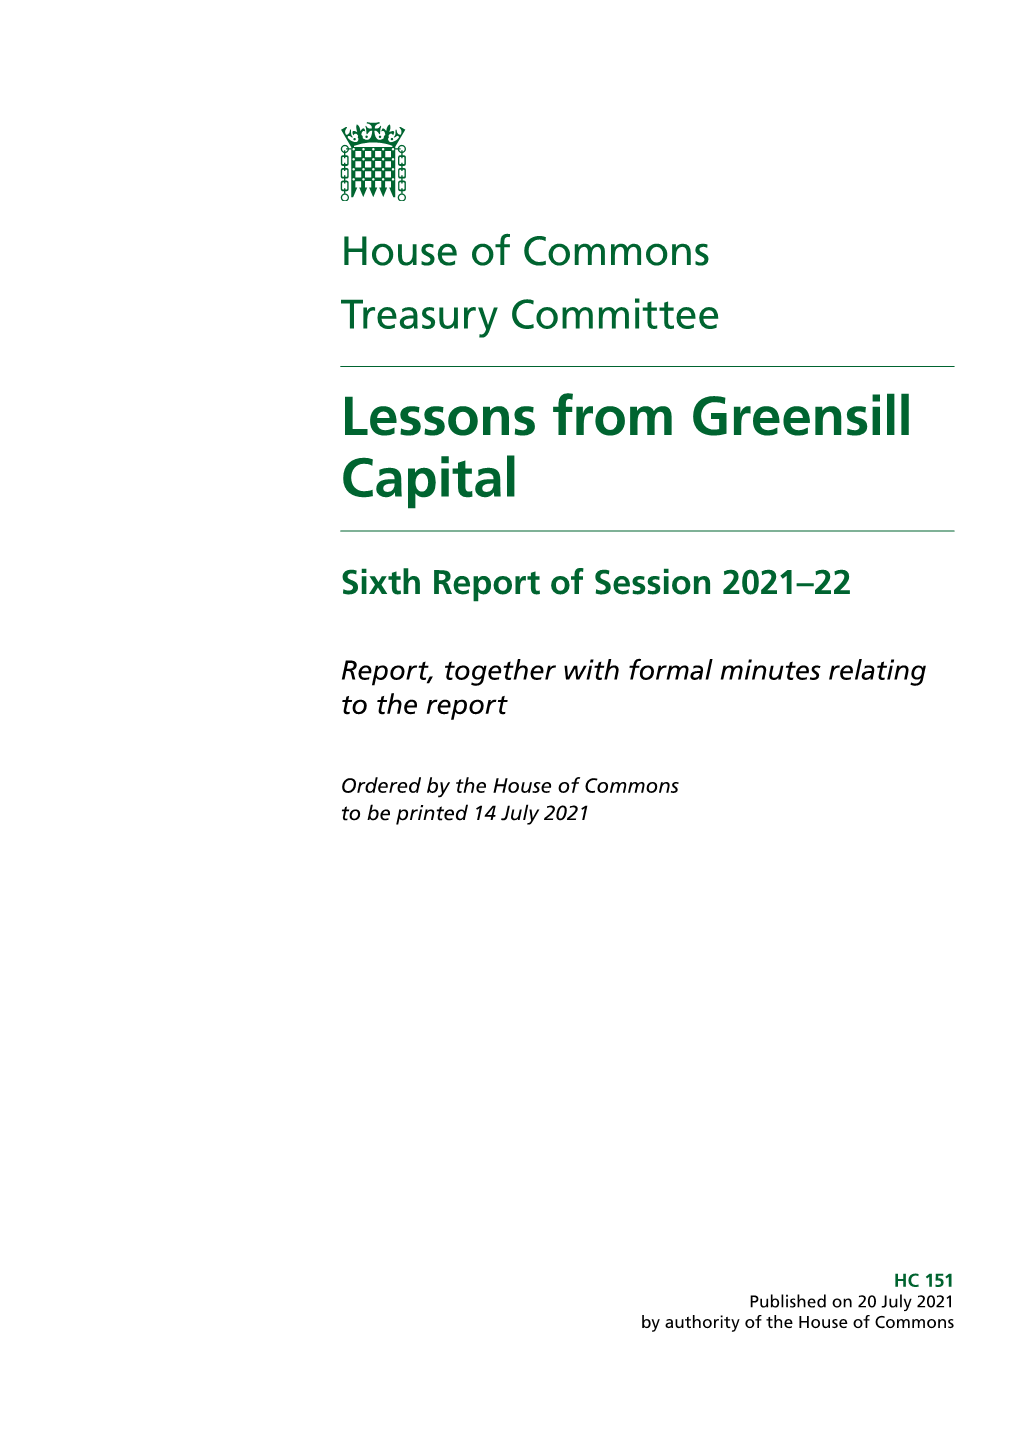 Lessons from Greensill Capital